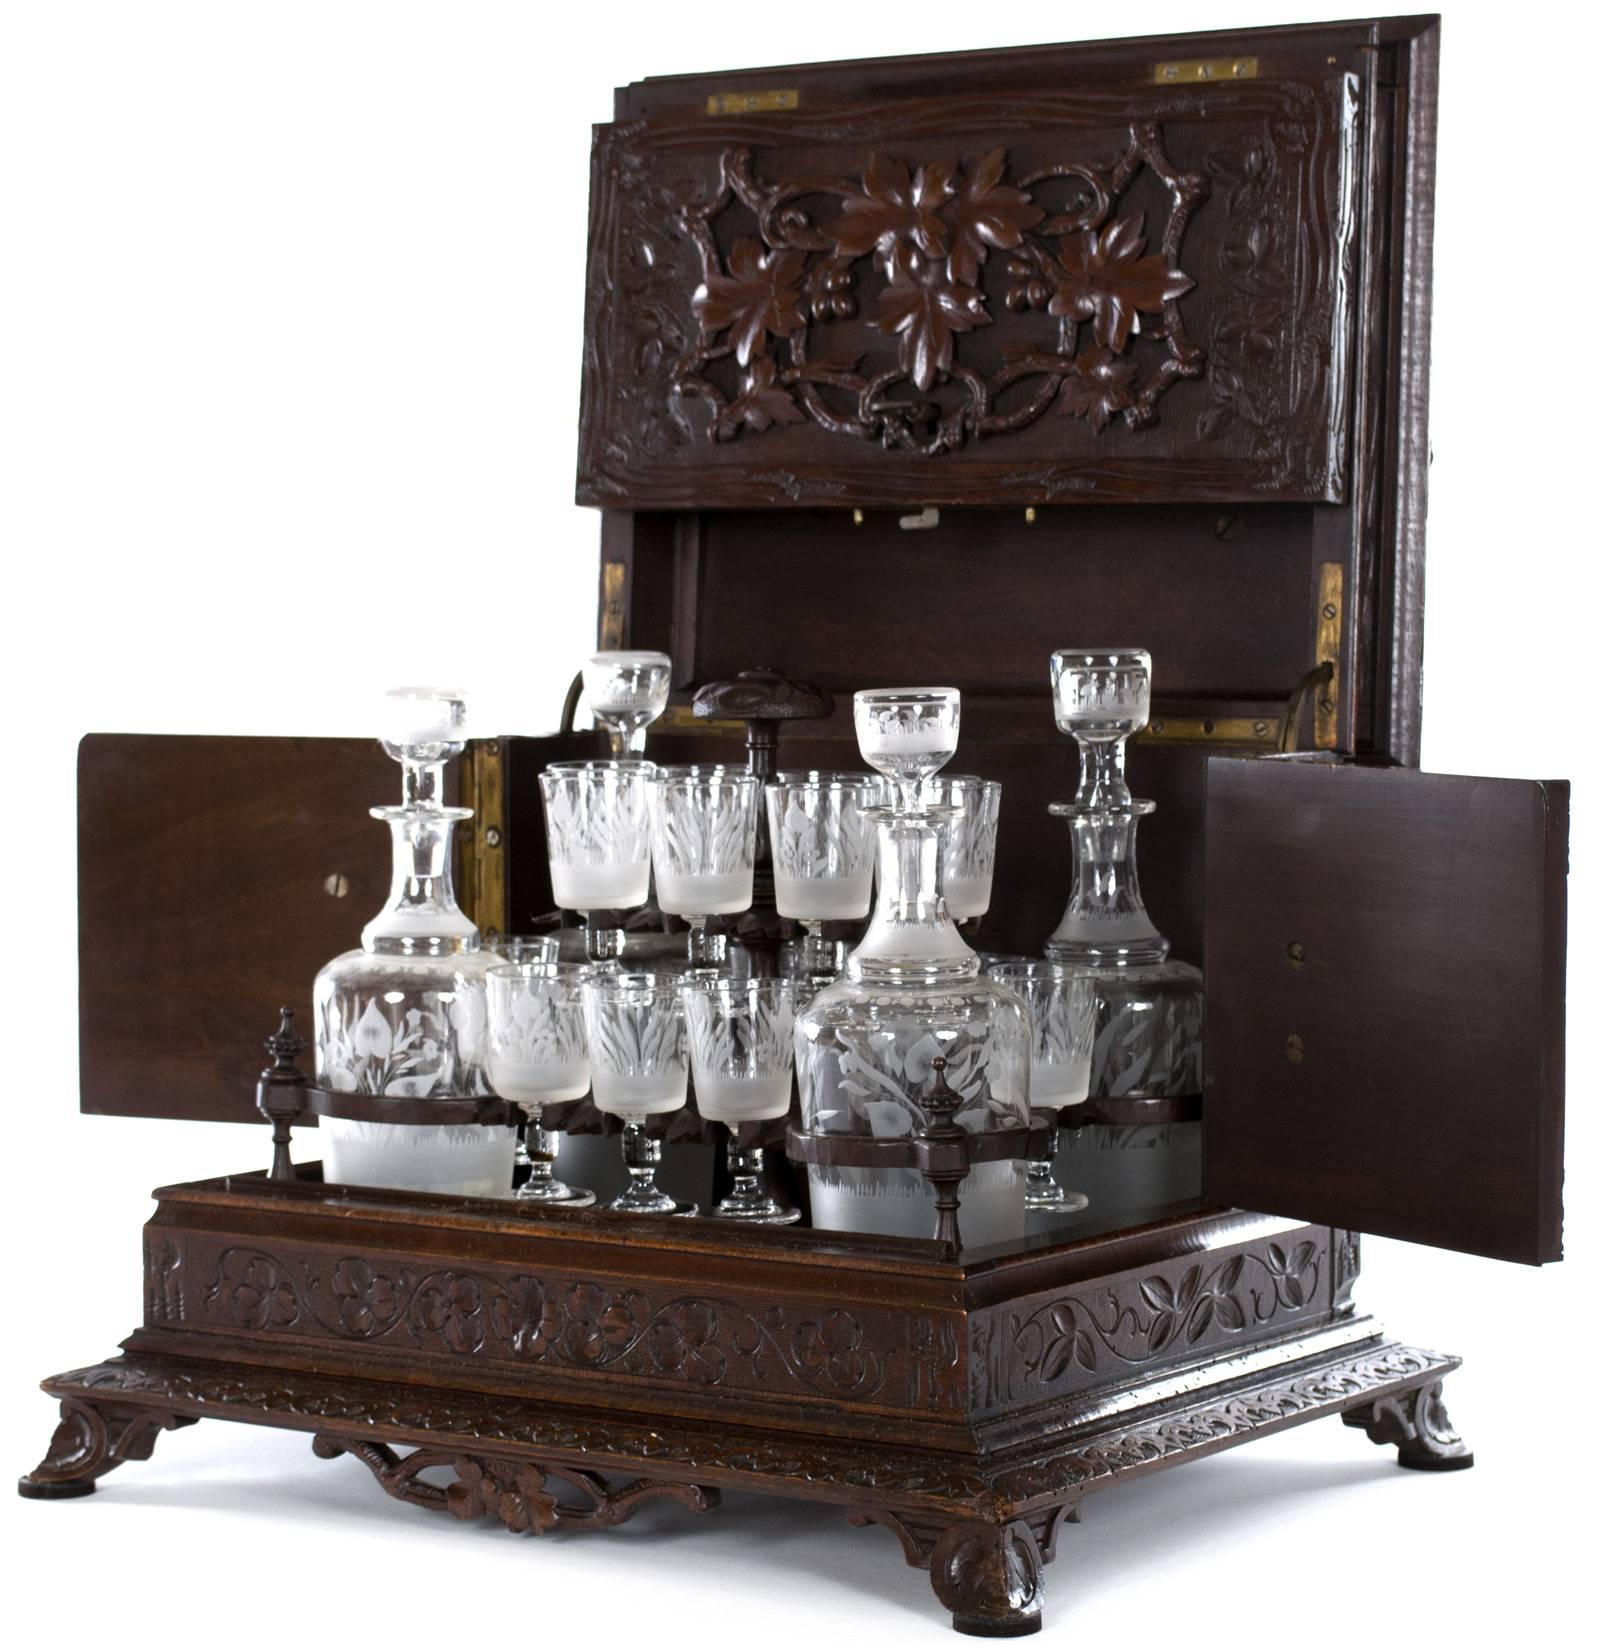 A carved walnut liquor cabinet, topped with a pair of quails surrounded by their clutch nestled in foliage, the handles on each side are in the form of bear heads, and the front is a beautifully rendered wreath of maple leaves and vines. The case